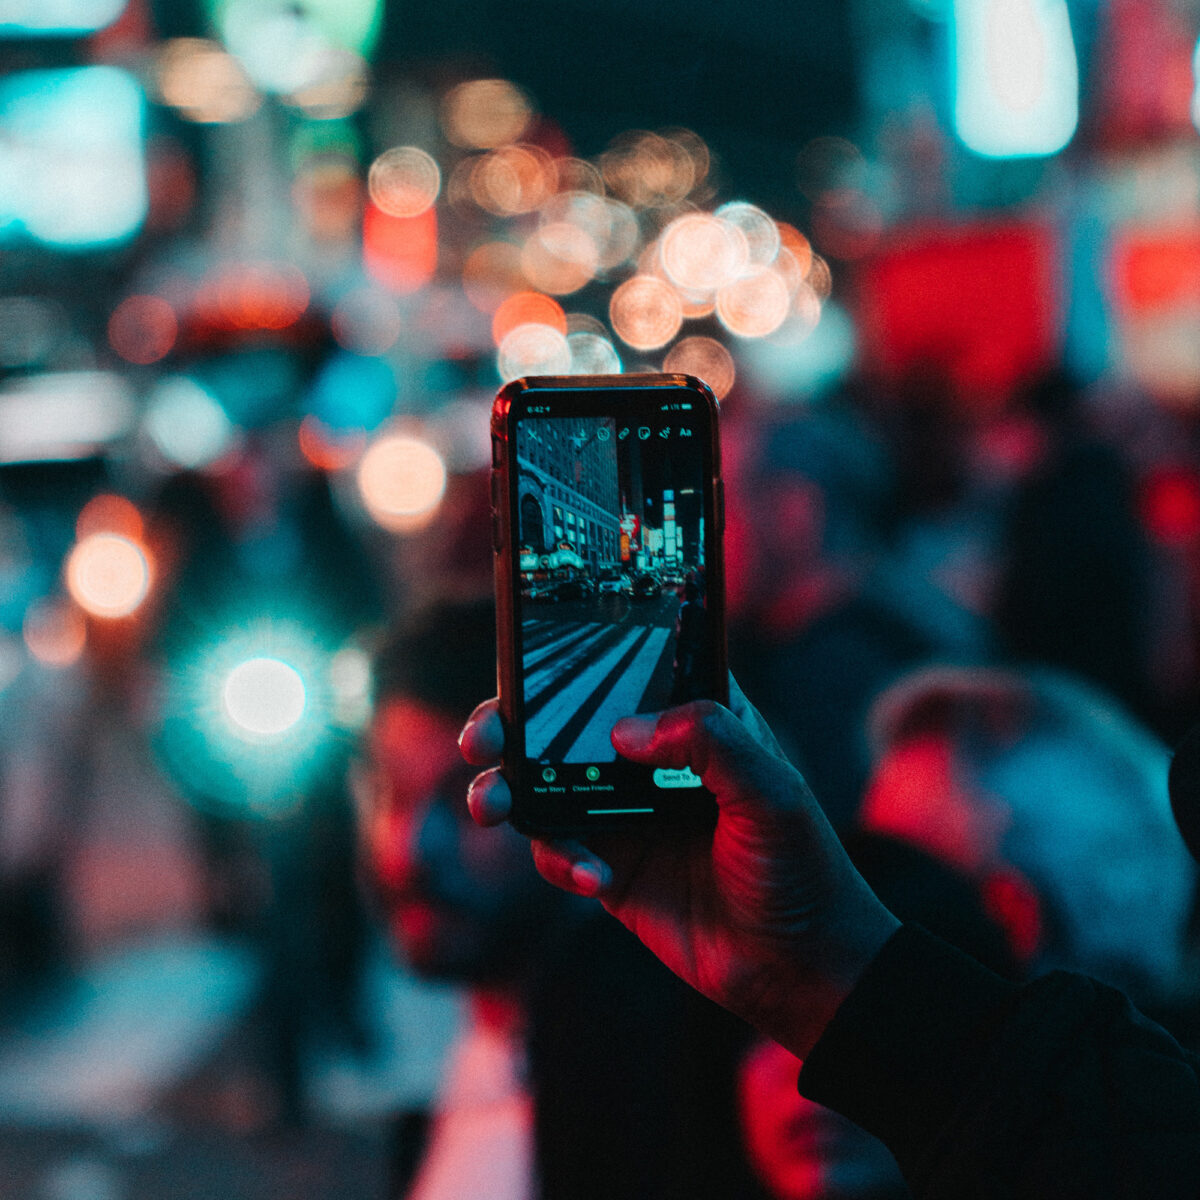 A photo of Times Square, New York, being taken on a phone